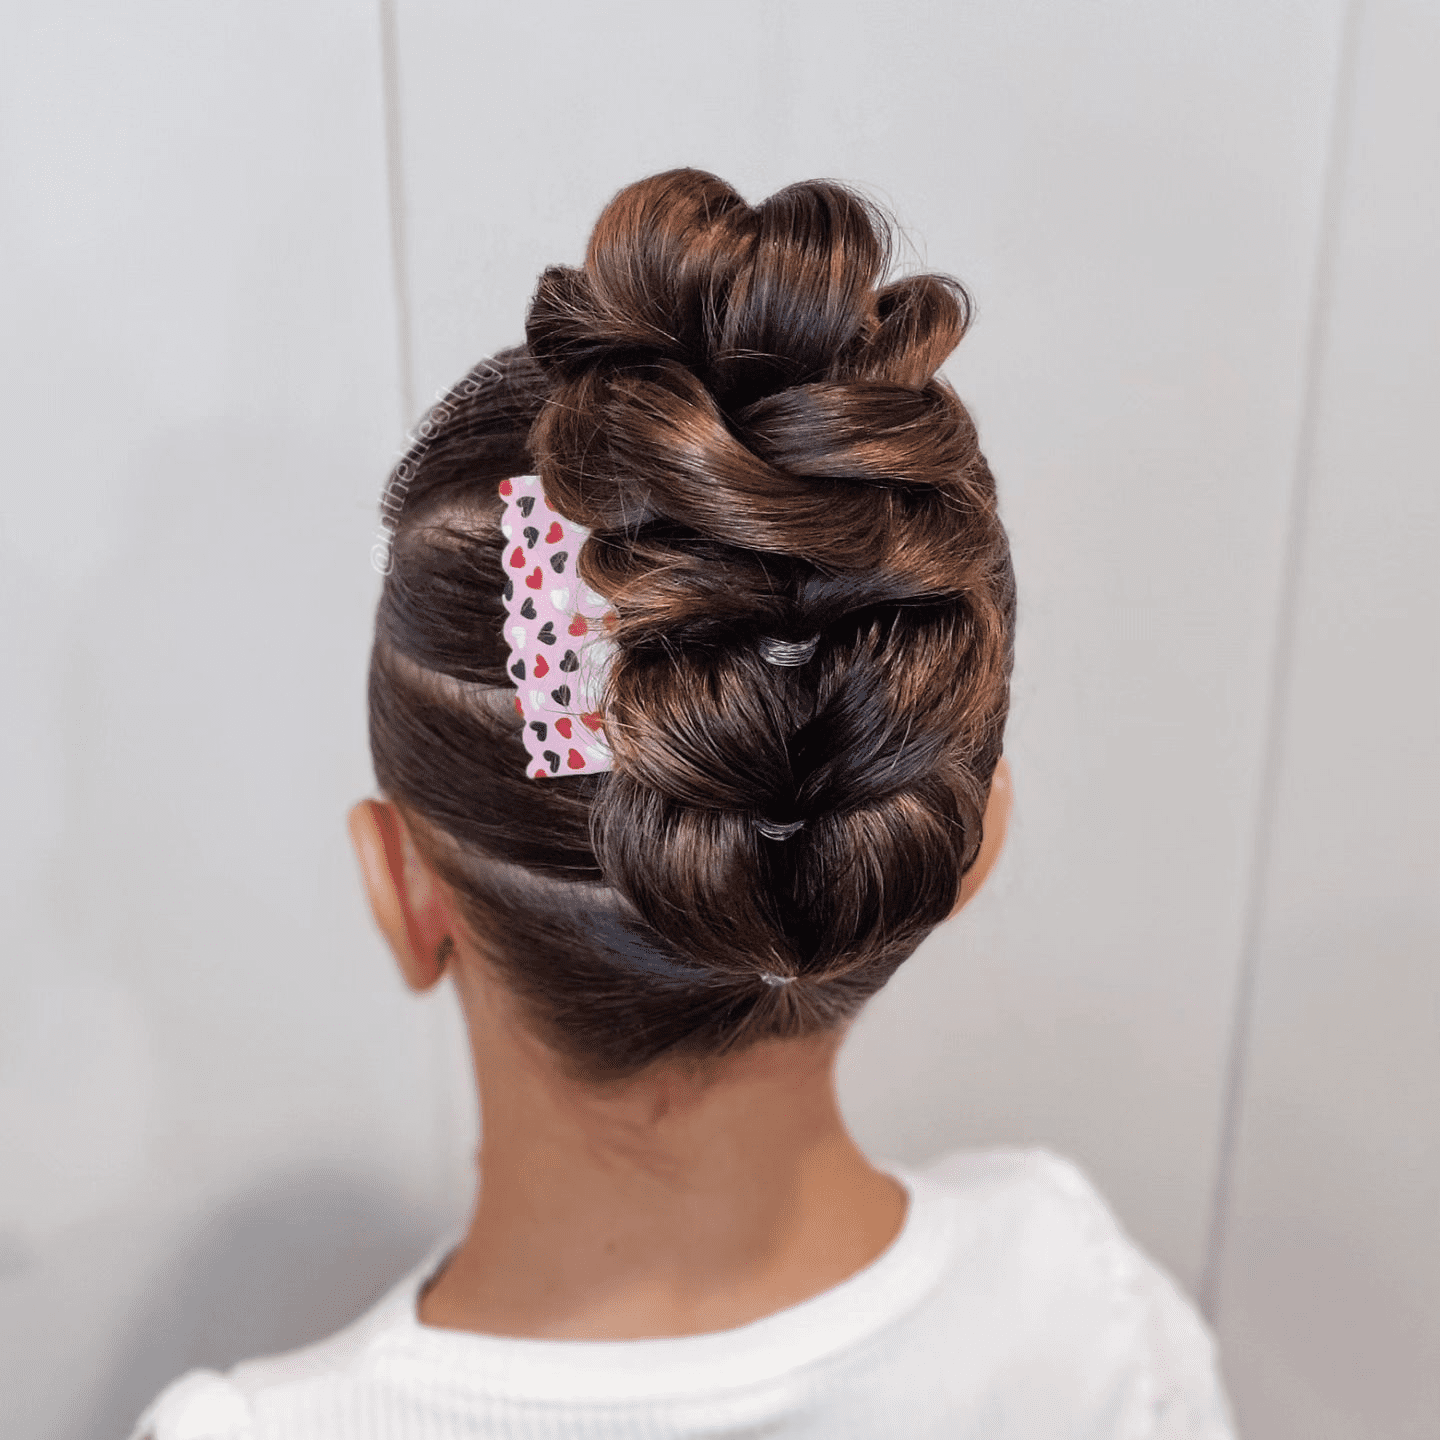 Twirling Braid with Pink Bow